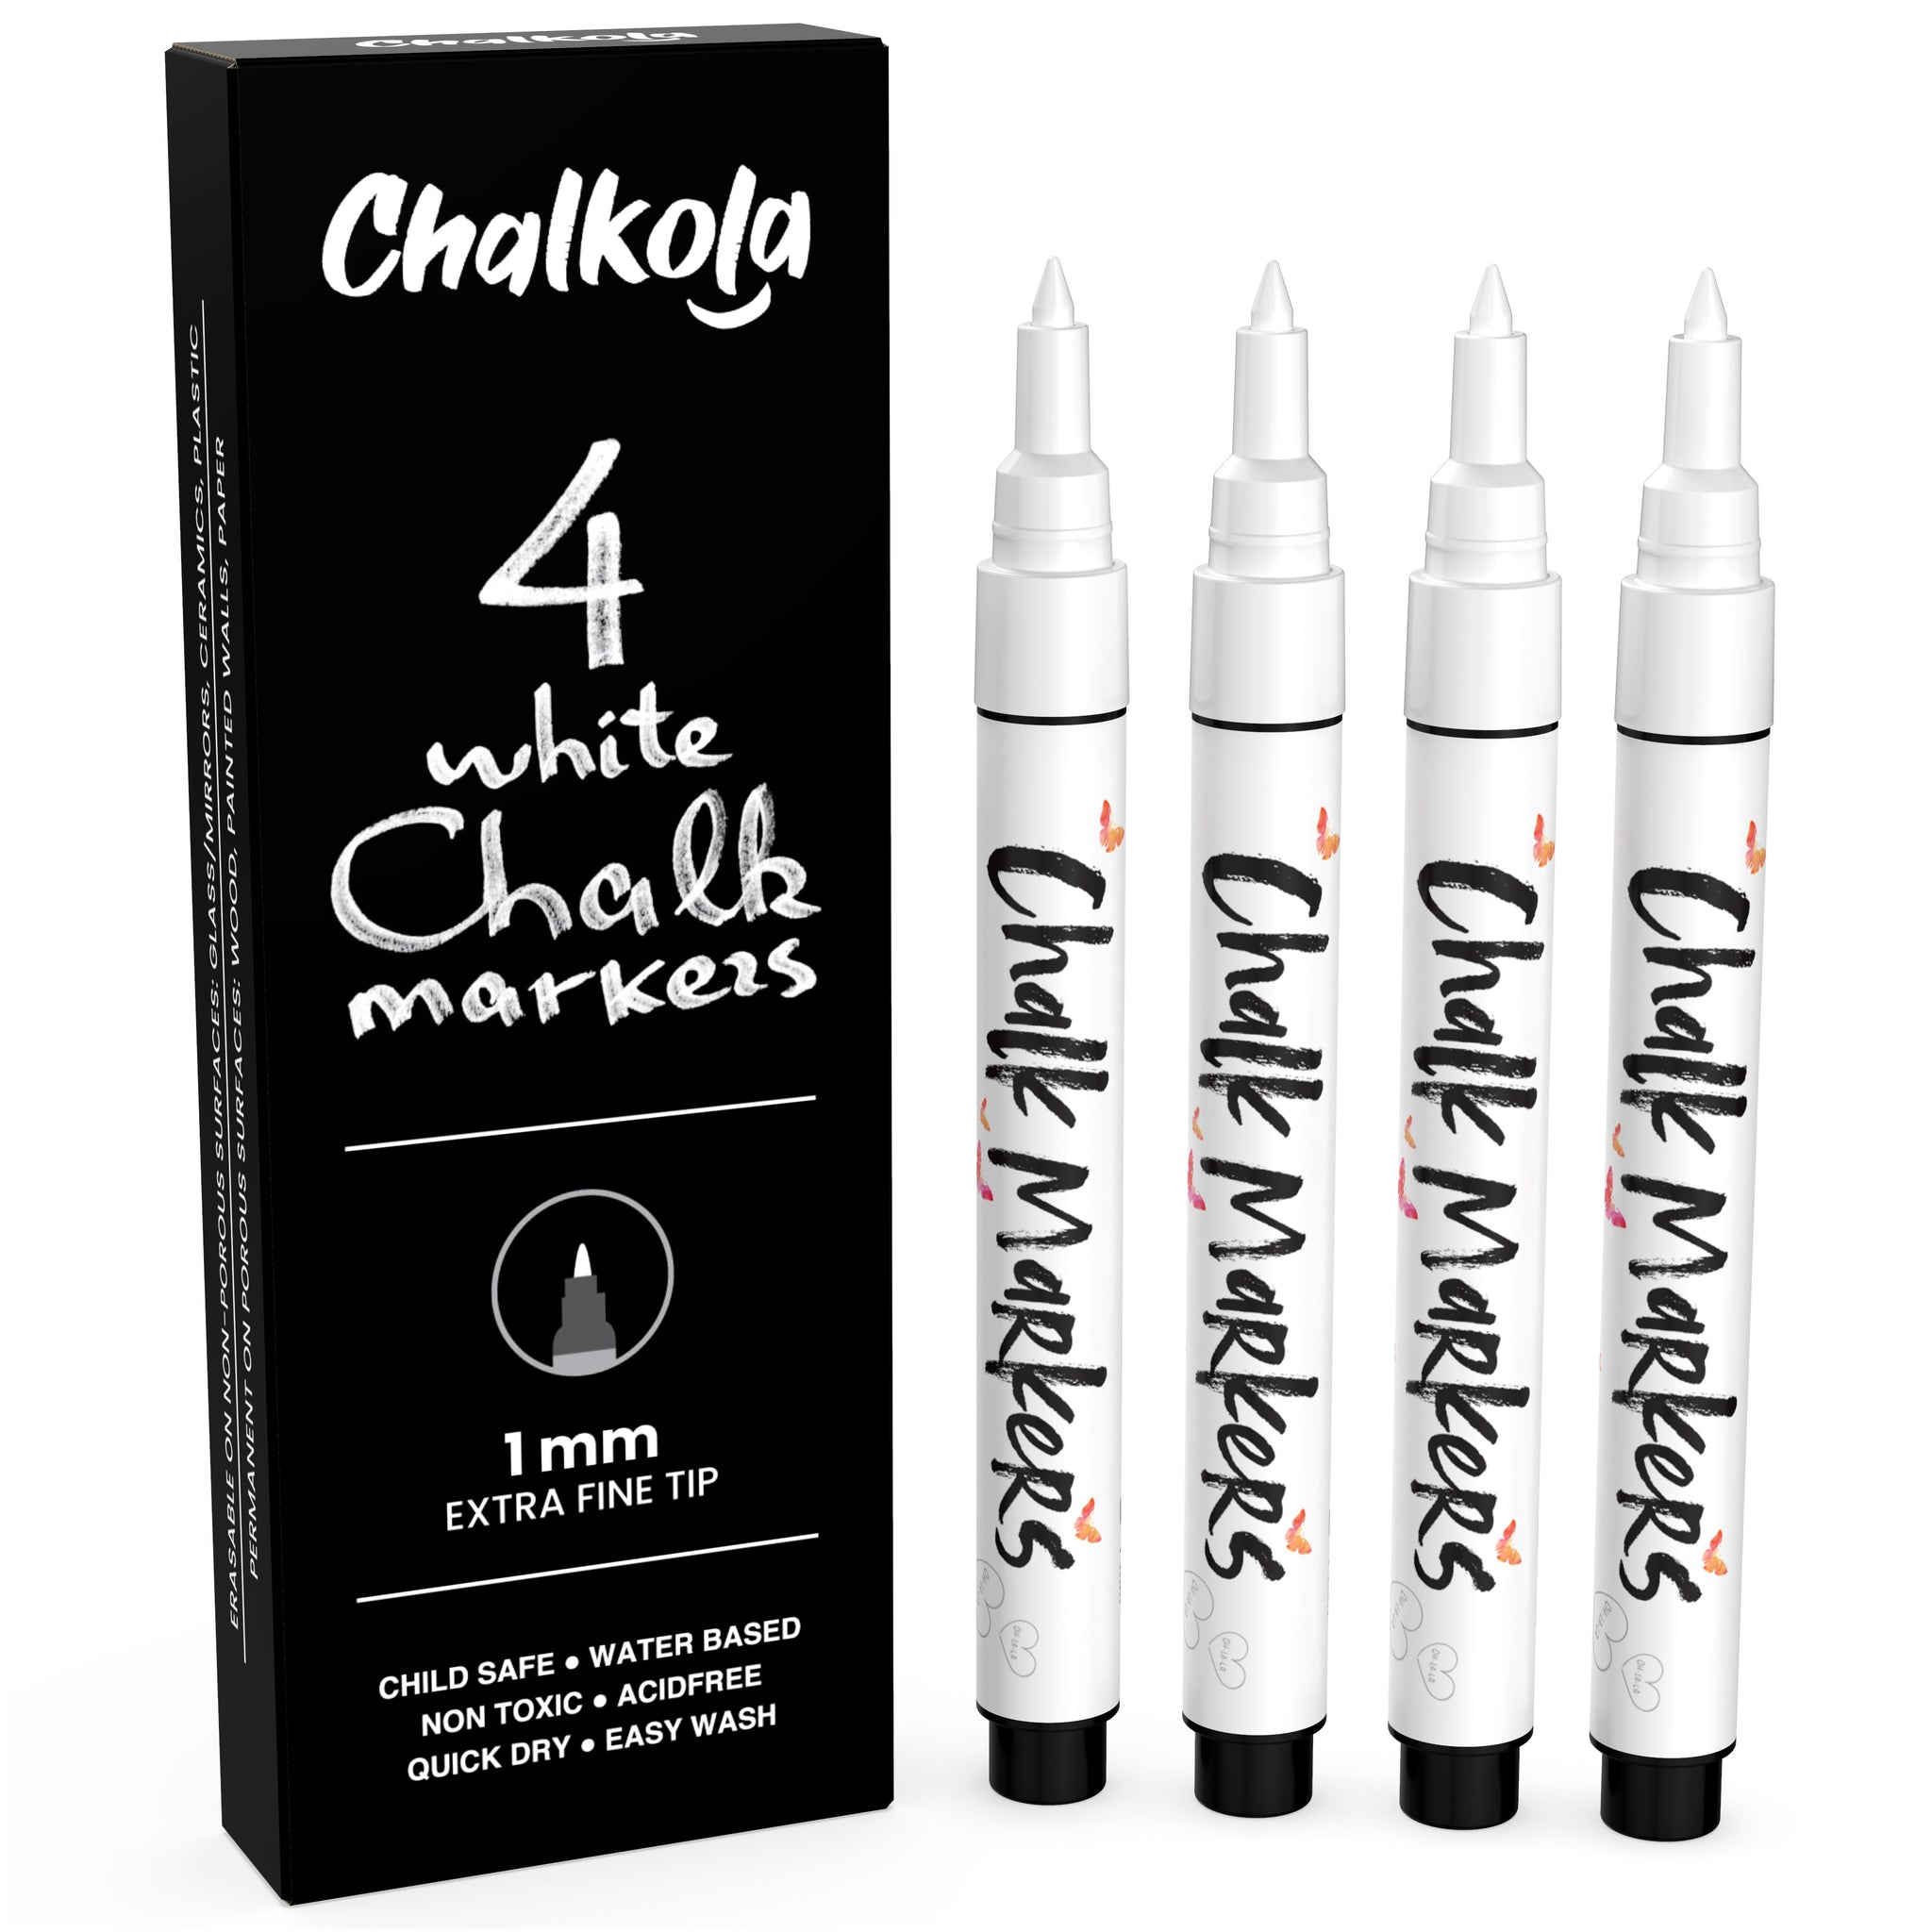 Black Drawing Pens, 12 Pack Felt Tip Markers for Adults and Kids